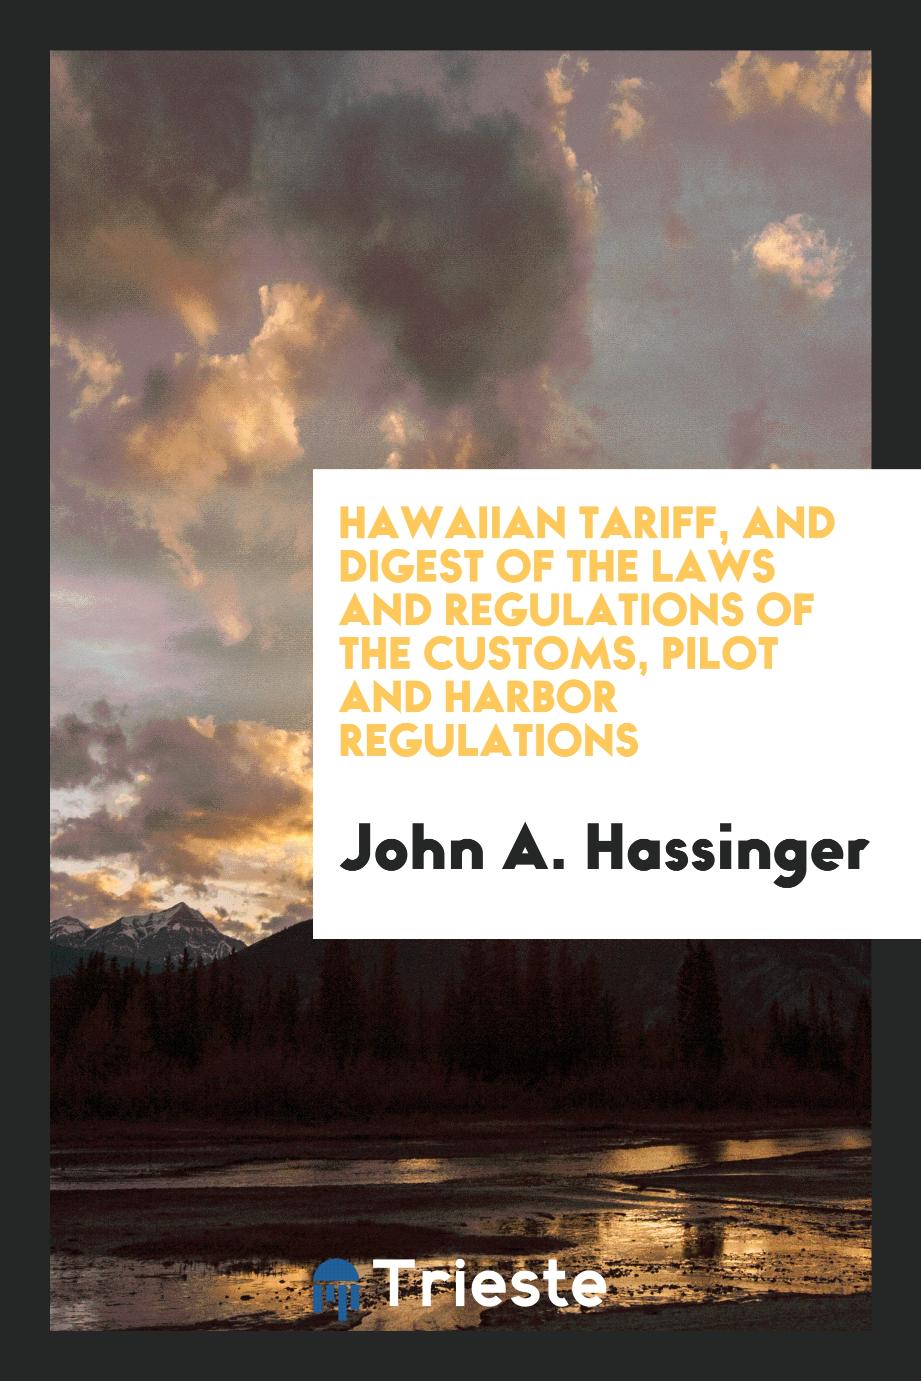 Hawaiian Tariff, and Digest of the Laws and Regulations of the Customs, Pilot and Harbor Regulations